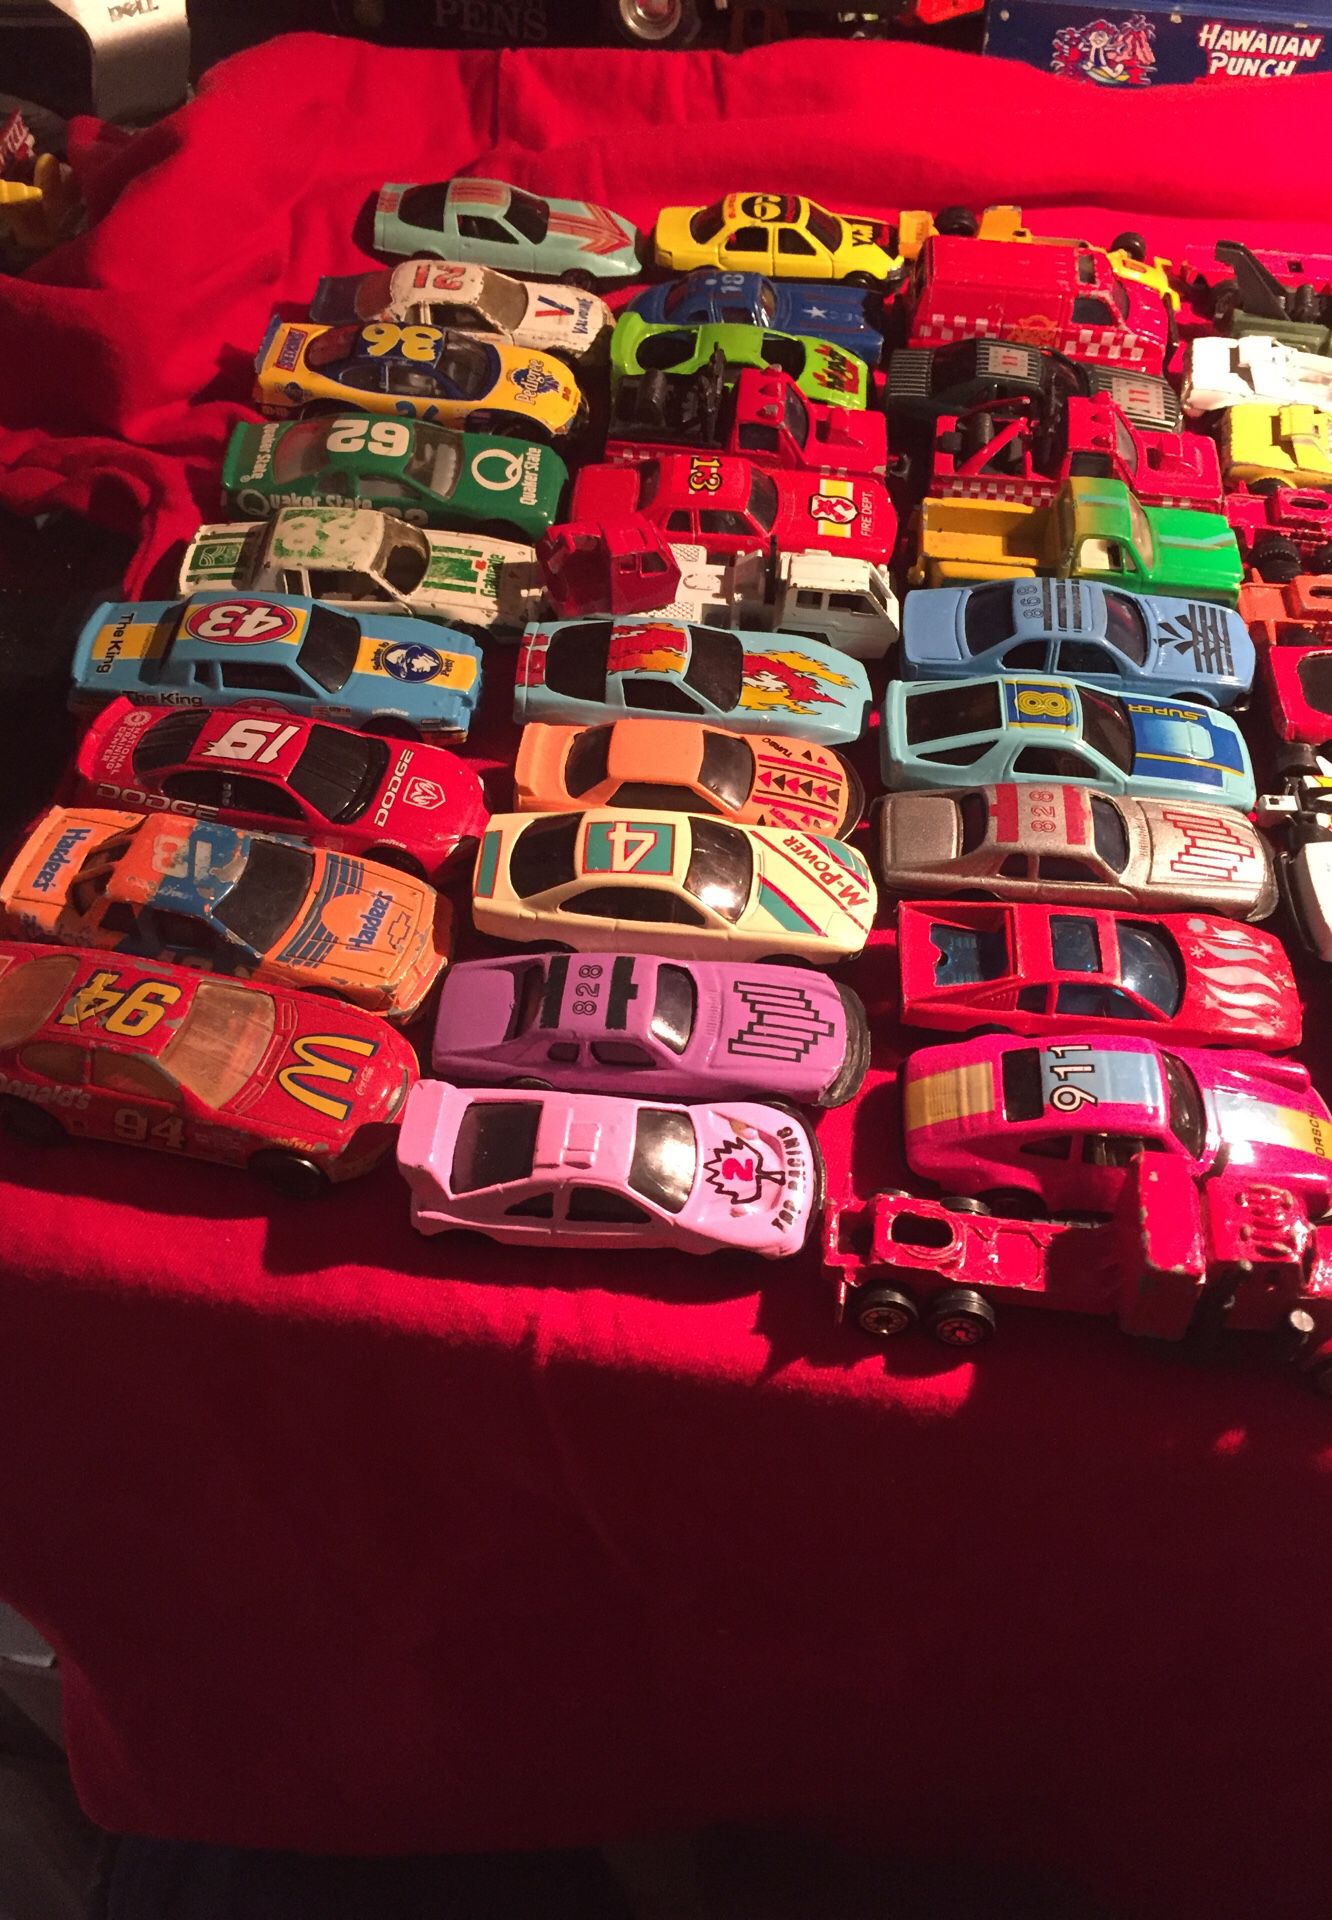 Lot 84 loose cars and trucks